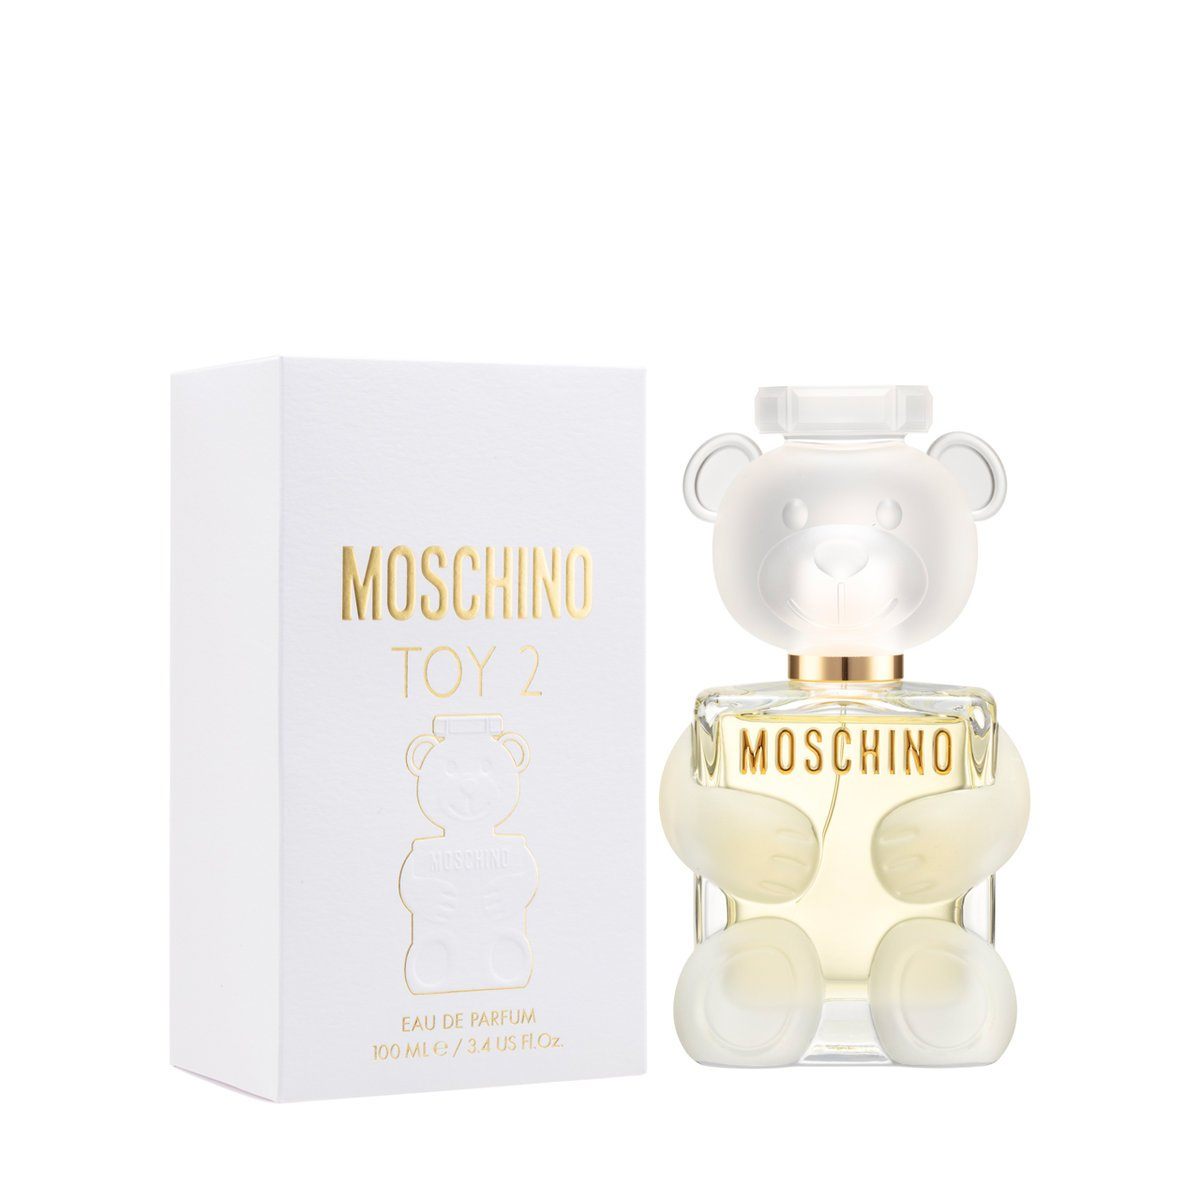 Toy 2, the new women's fragrance by Moschino. The iconic Moschino teddy bear is here! The sparkling top notes of mandarin orange and Granny Smith apple combined with delicate floral notes enhanced by amber wood and sandalwood add radiance and softness to the new Toy 2 scent. Top Notes: Mandarin Orange, Granny Smith Apple Middle Notes: Magnolia, Jasmine Petals, Peony, White Currant Bottom Notes: Musk, Sandalwood, Ambery Woods A fresh, floral, musk fragrance